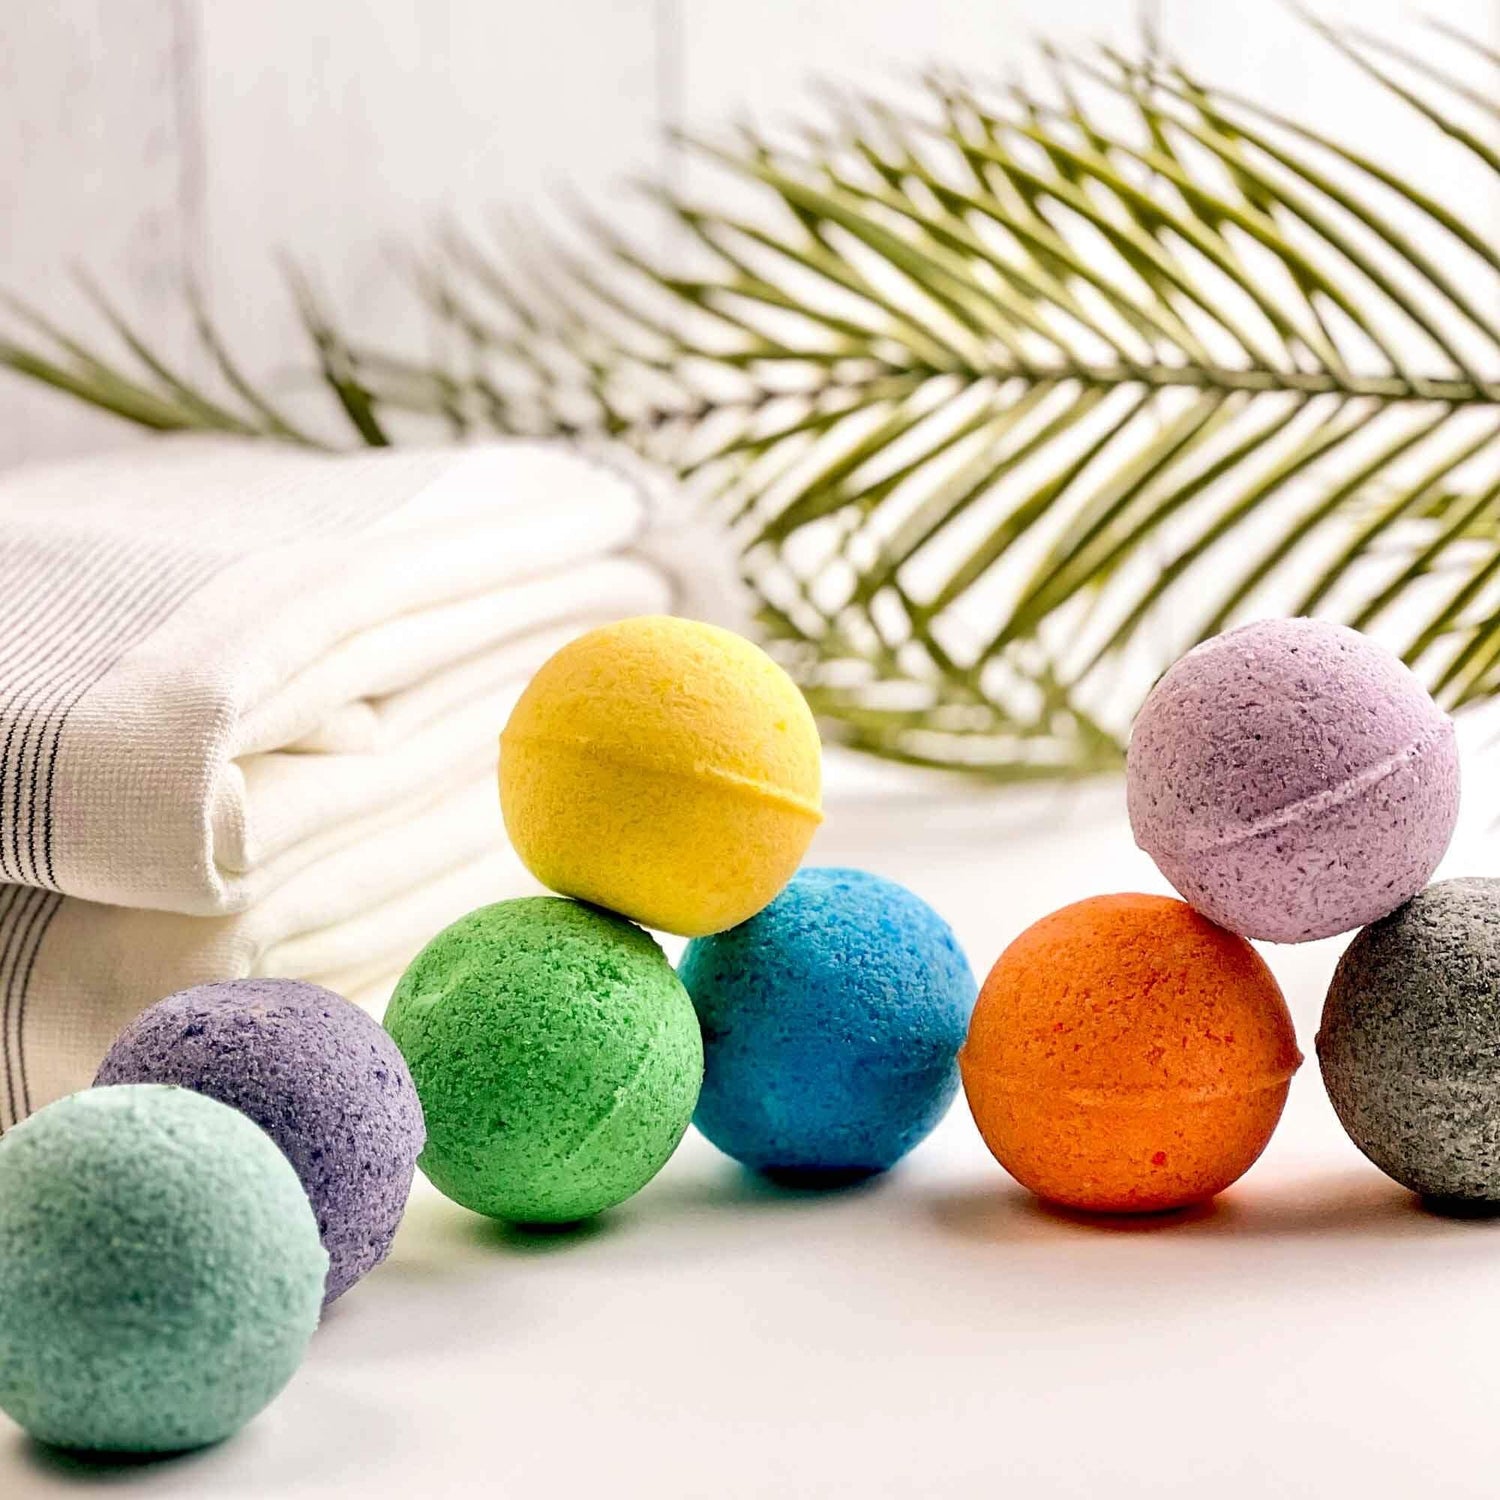 Handmade Honey Jasmine Bath Bombs | Natural and Relaxing | Perfect for Self-Care and Gifting